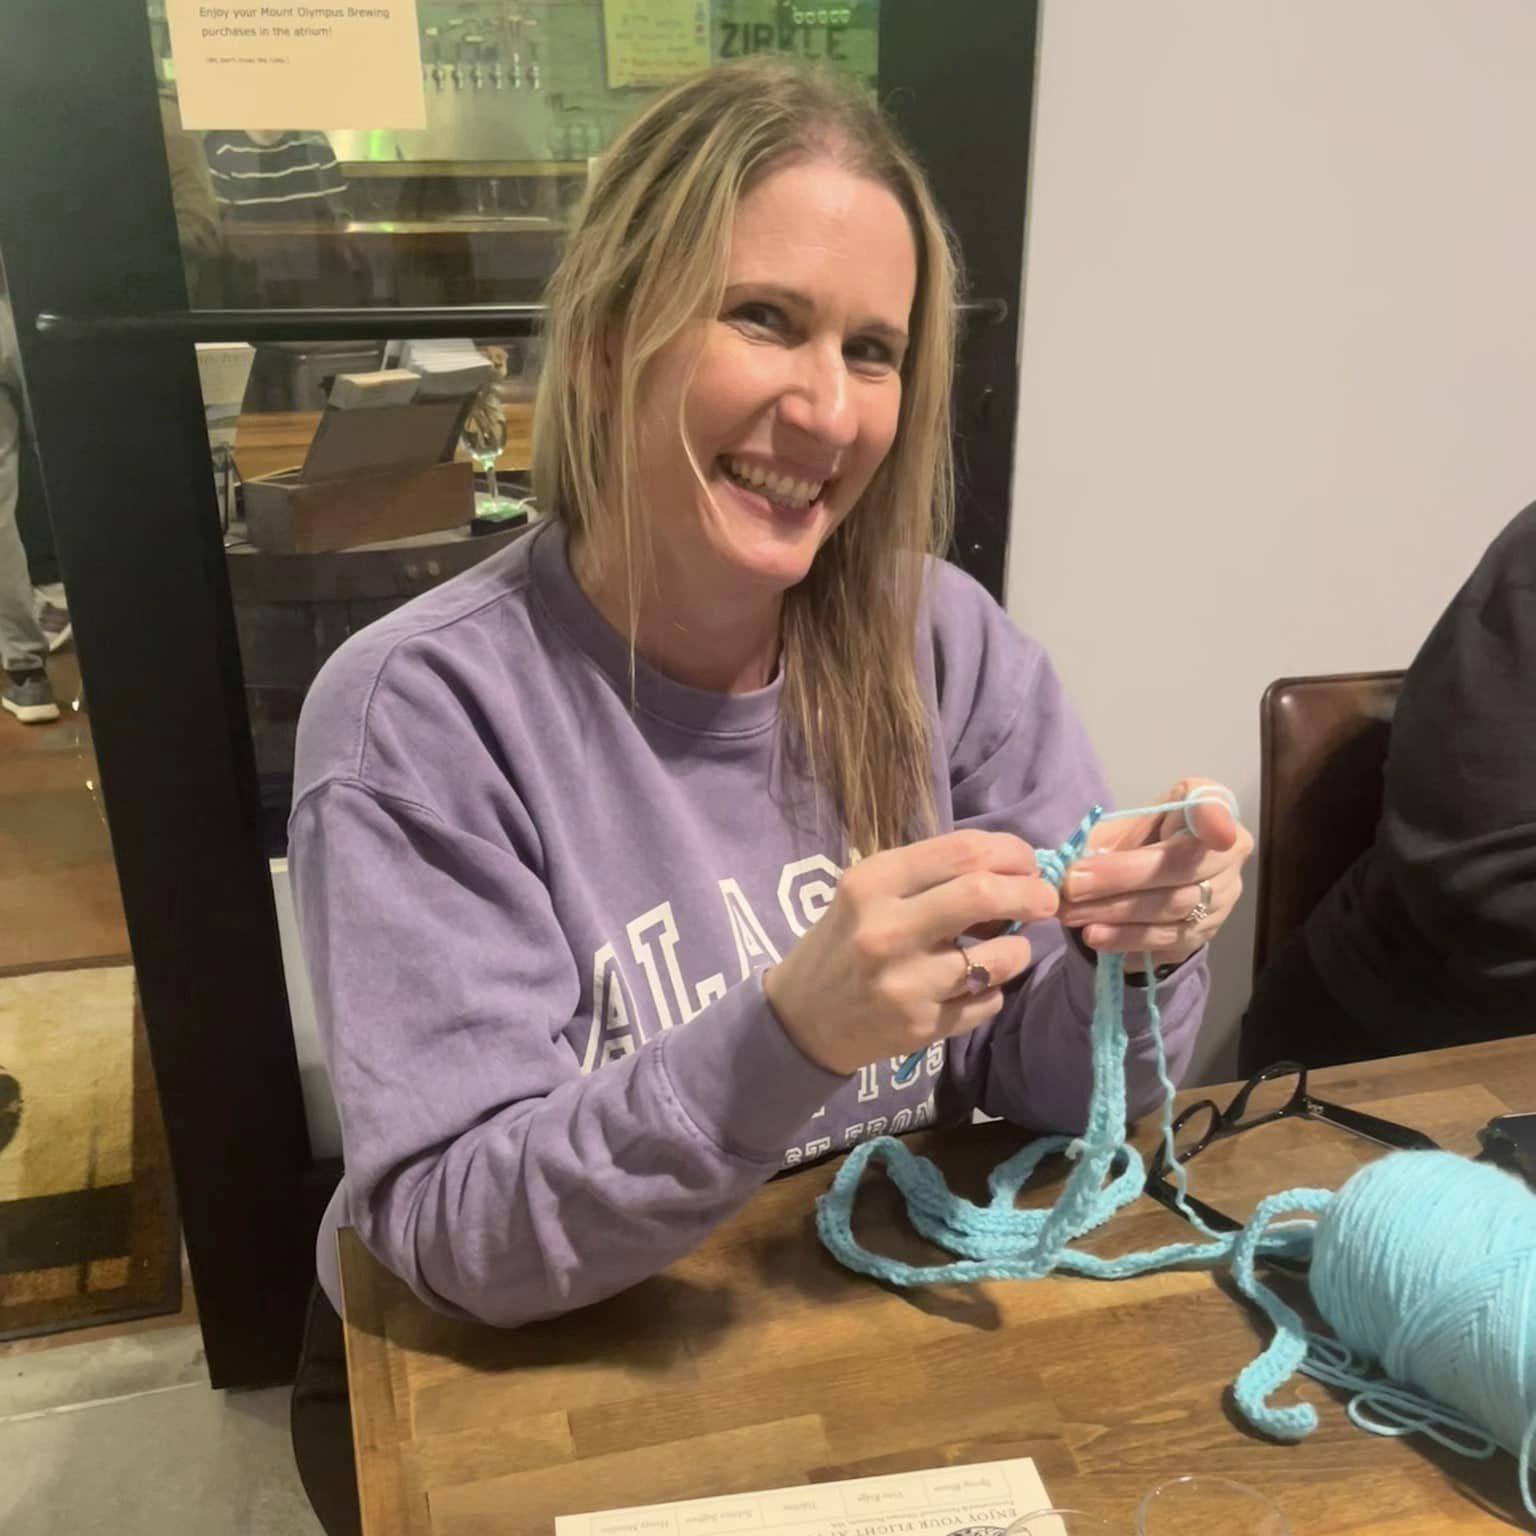 a woman smiles while crocheting at a table with other knitters and crocheters